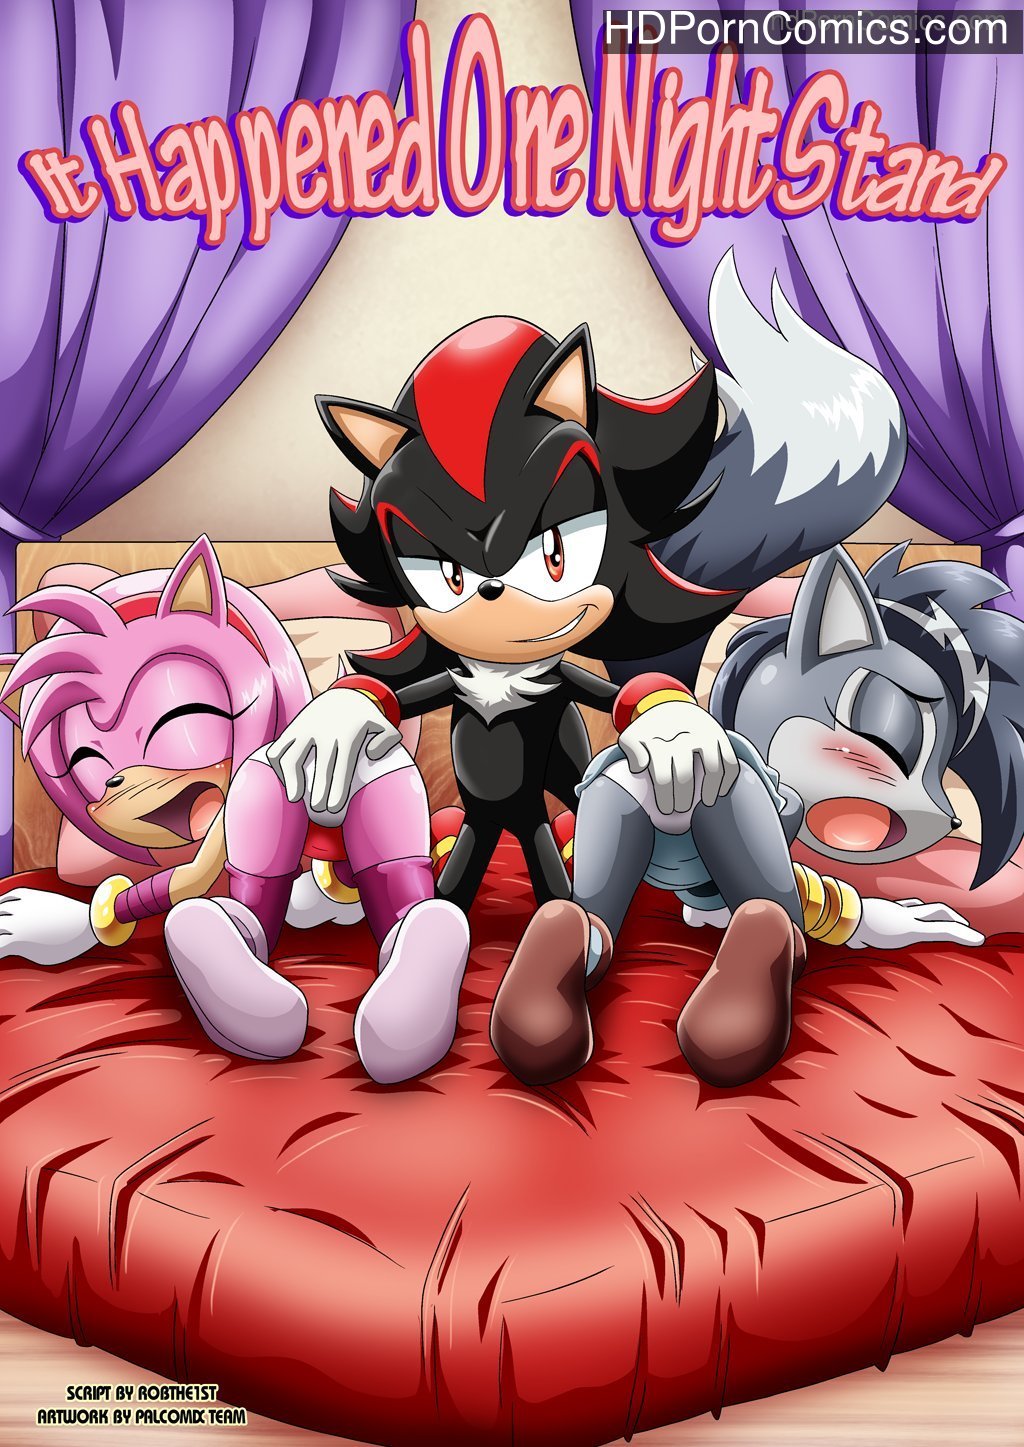 1024px x 1447px - It Happened One Night Stand (Sonic The Hedgehog) - Porncomics free ...